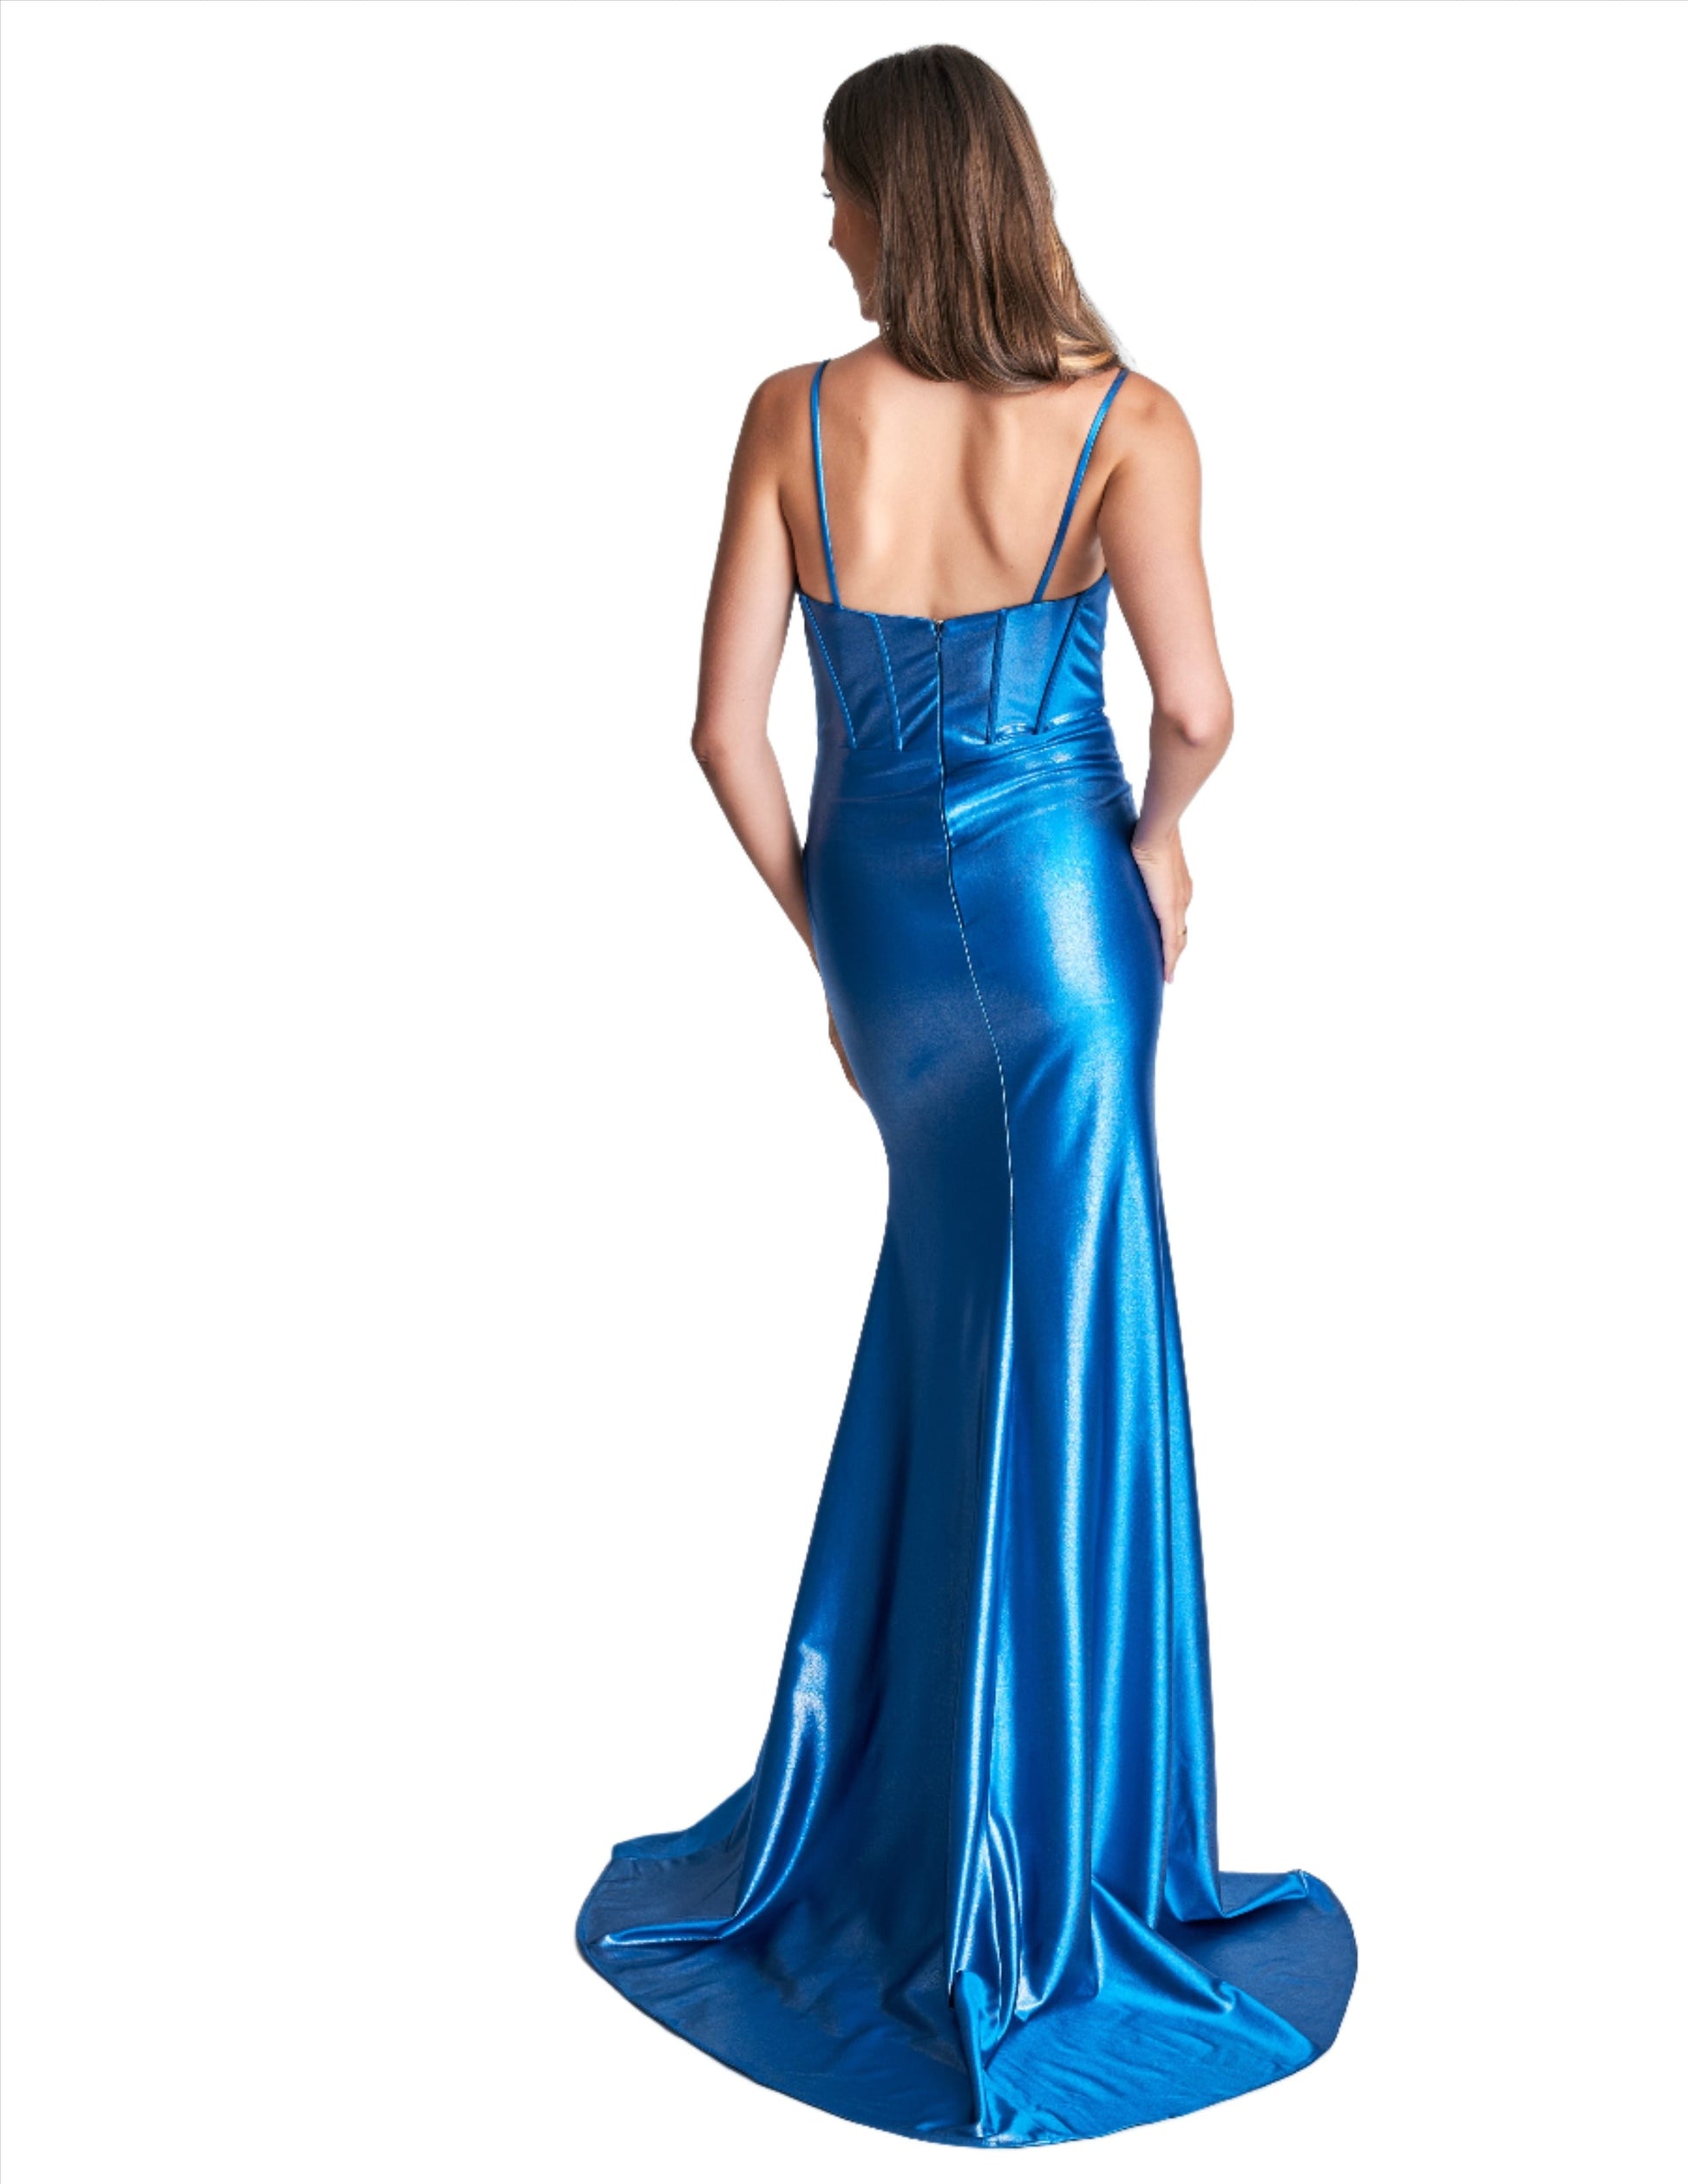 Experience elegance and sophistication in the Nina Canacci 4404 Shimmer Jersey Corset Fitted Prom Dress. Designed with a slit V neck and ruched detailing, this formal gown accentuates your curves flawlessly. The shimmer jersey fabric adds a touch of glamour while providing a comfortable fit.